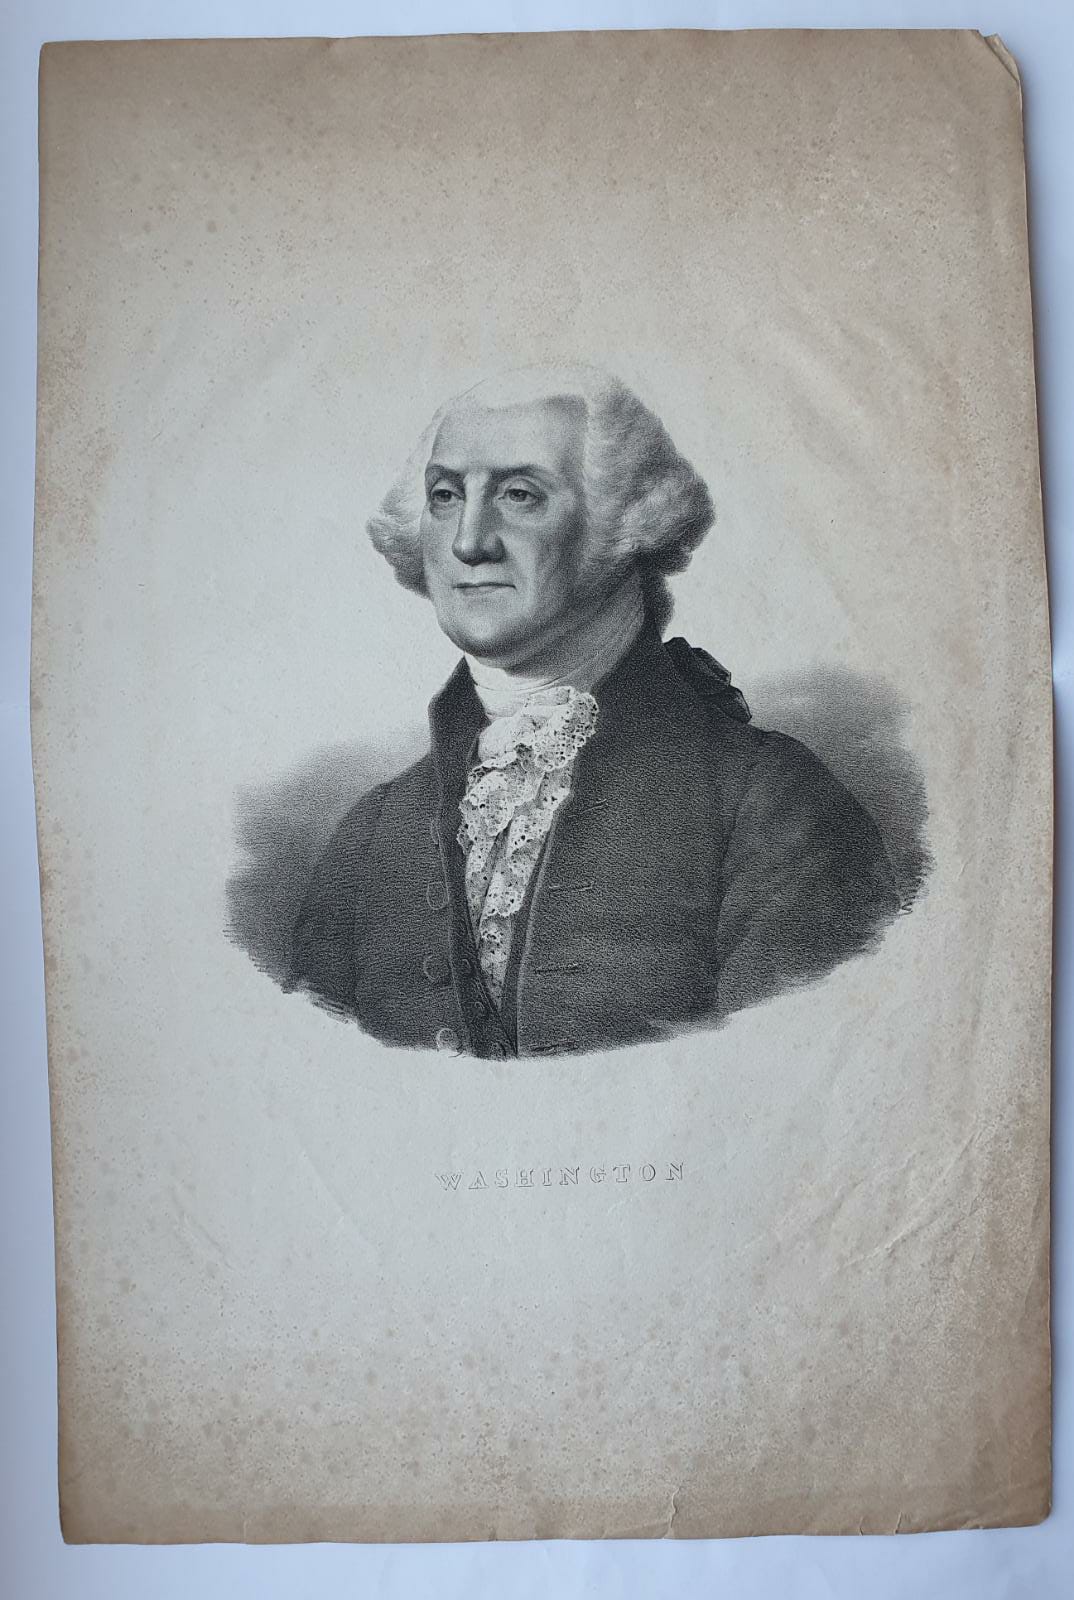 [Antique lithography, lithografie] A. Maurin, after G. Stuart, Portrait of President George Washington (United States), published 1800-1850.